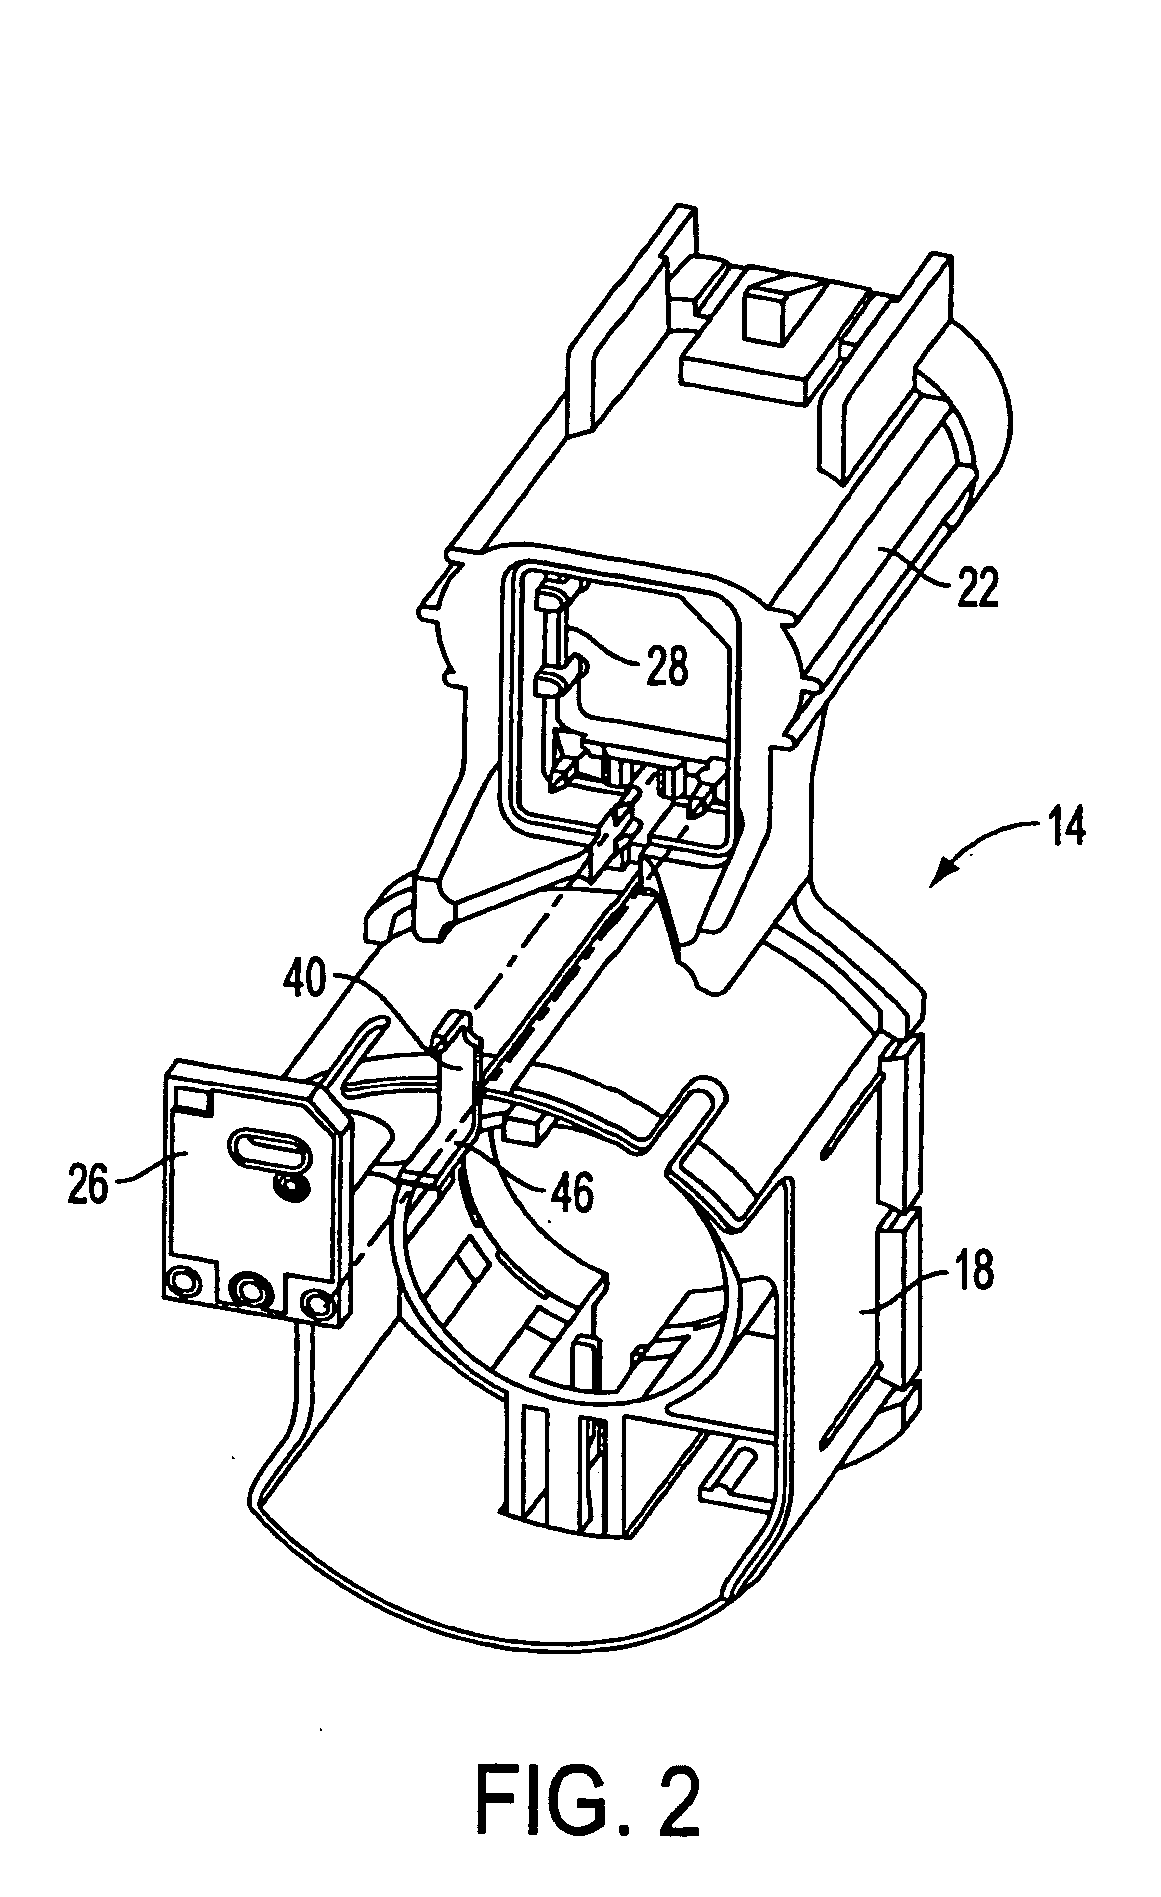 EMI suppression in permanent magnet DC motors having PCB outside motor in connector and overmolded